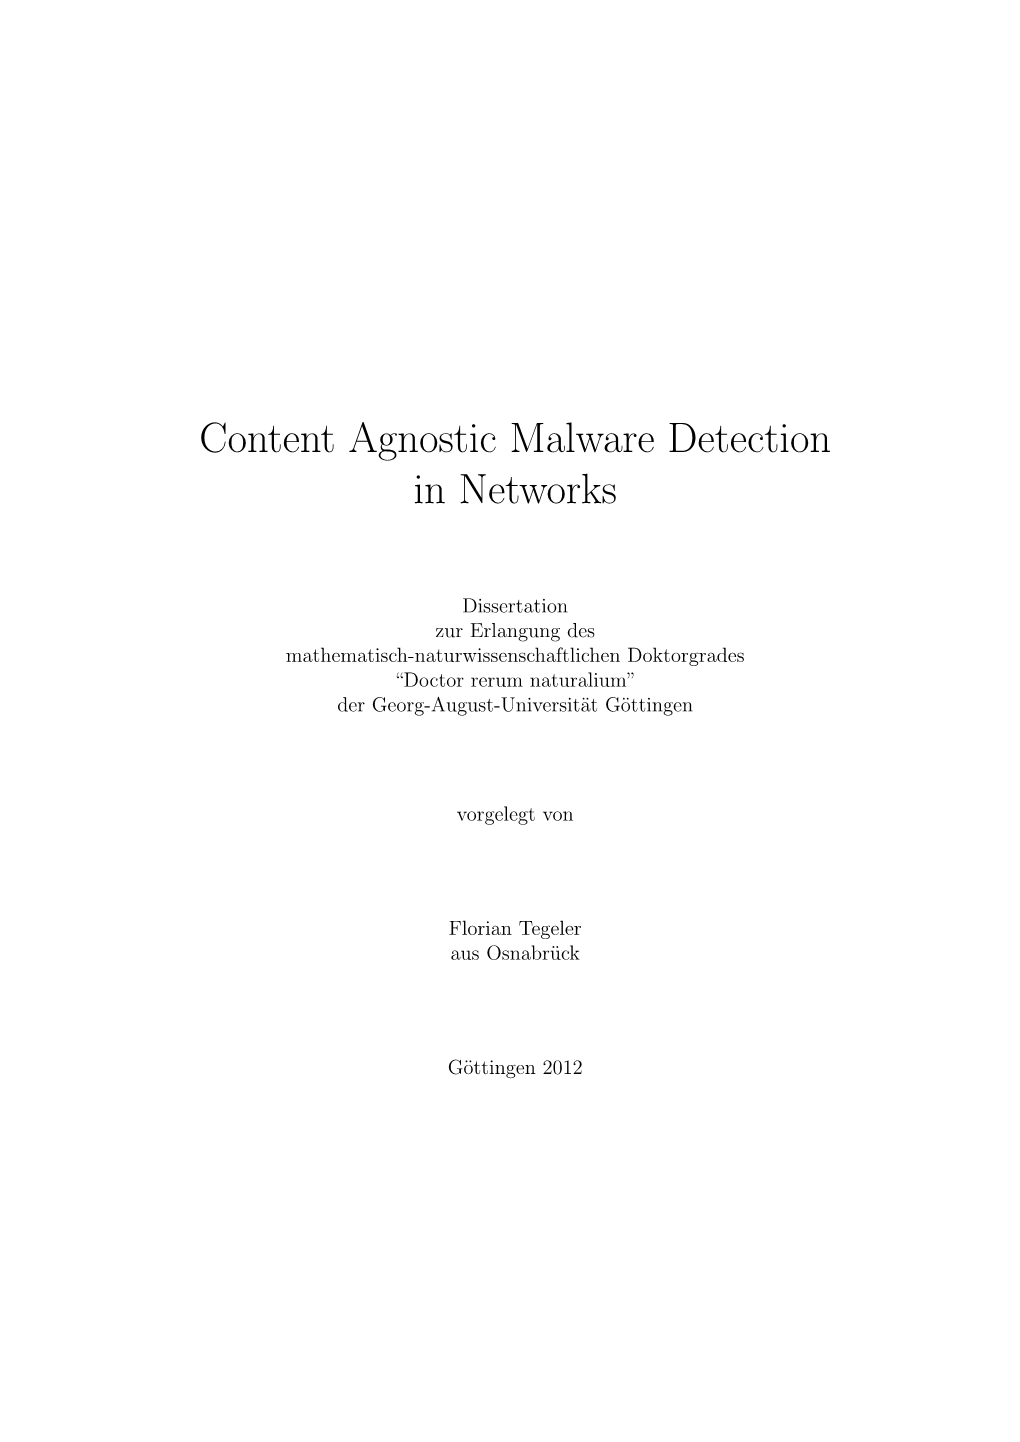 Content Agnostic Malware Detection in Networks